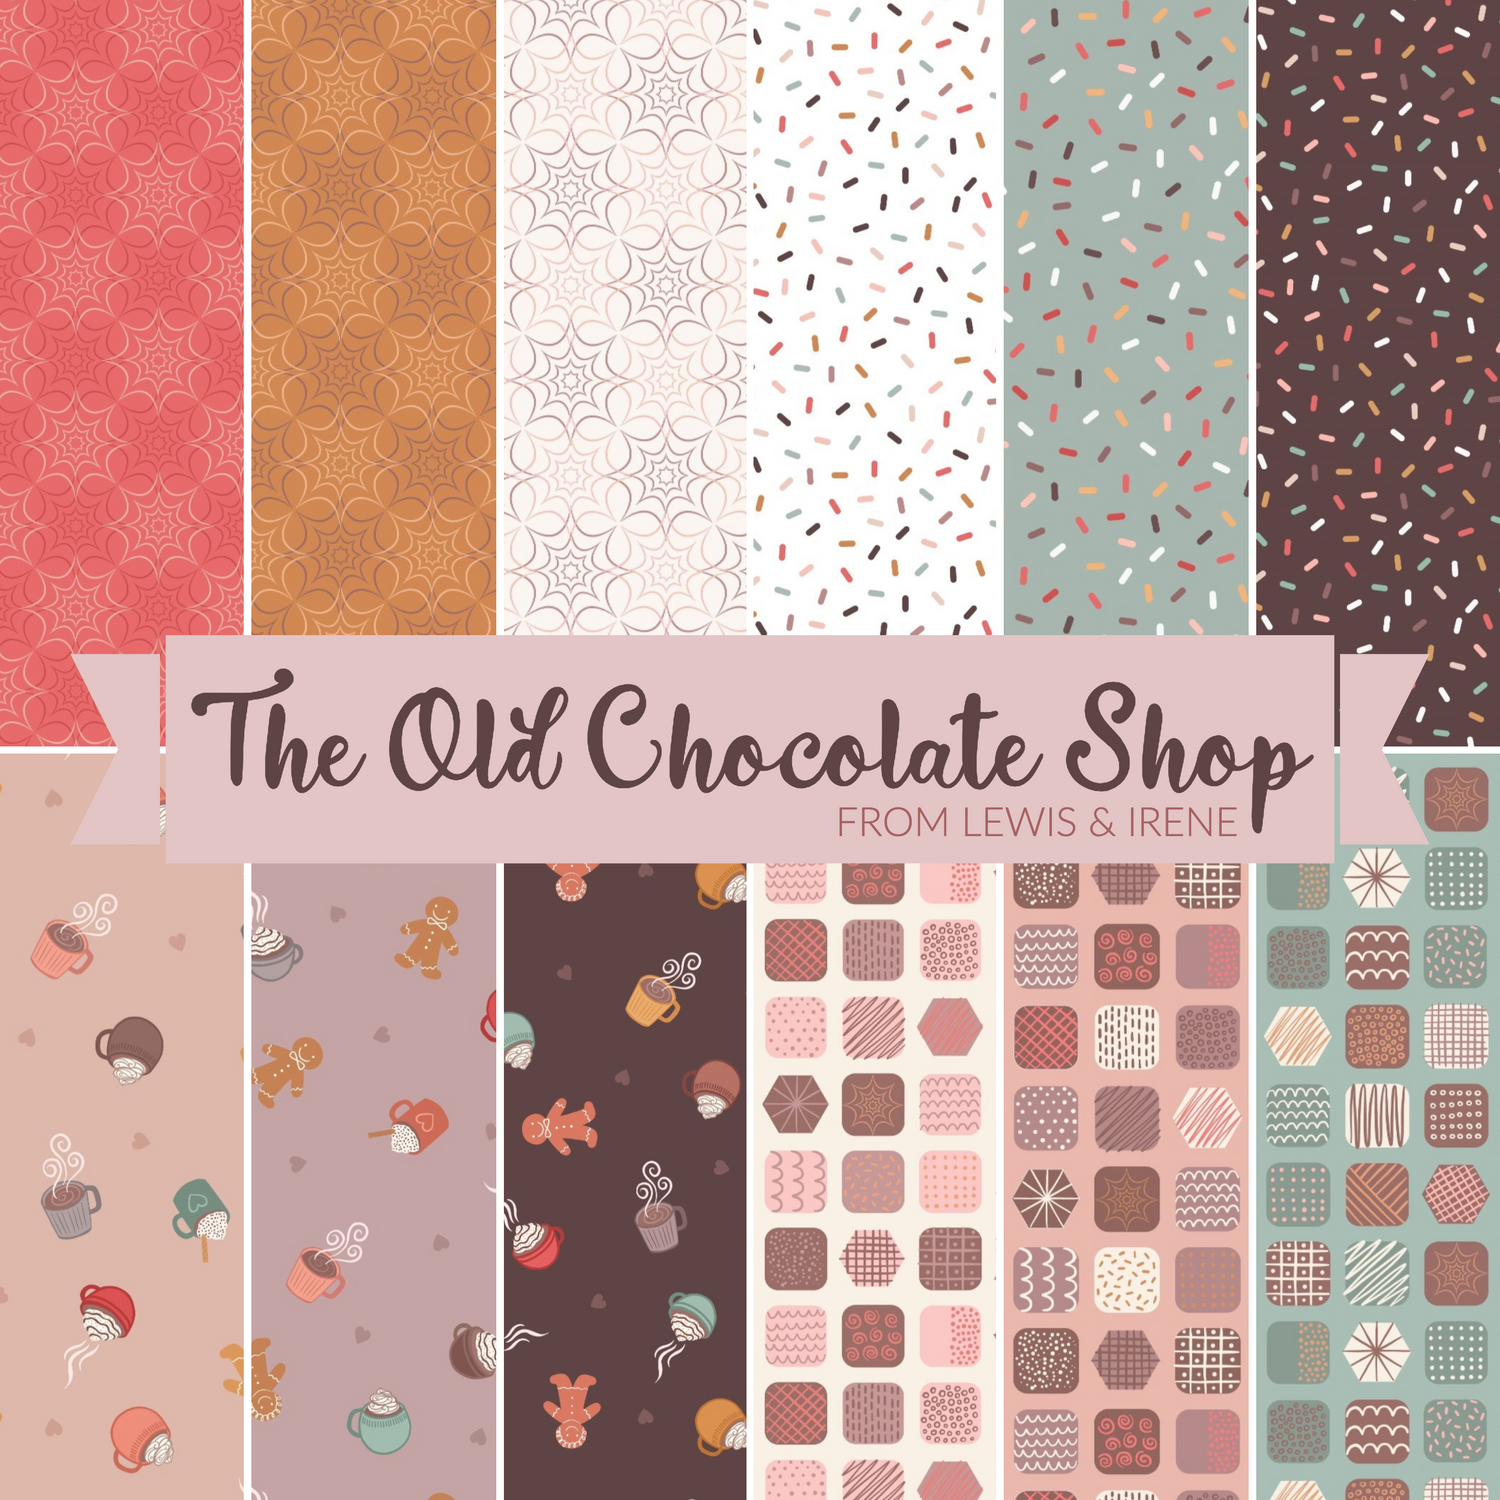 The Old Chocolate Shop